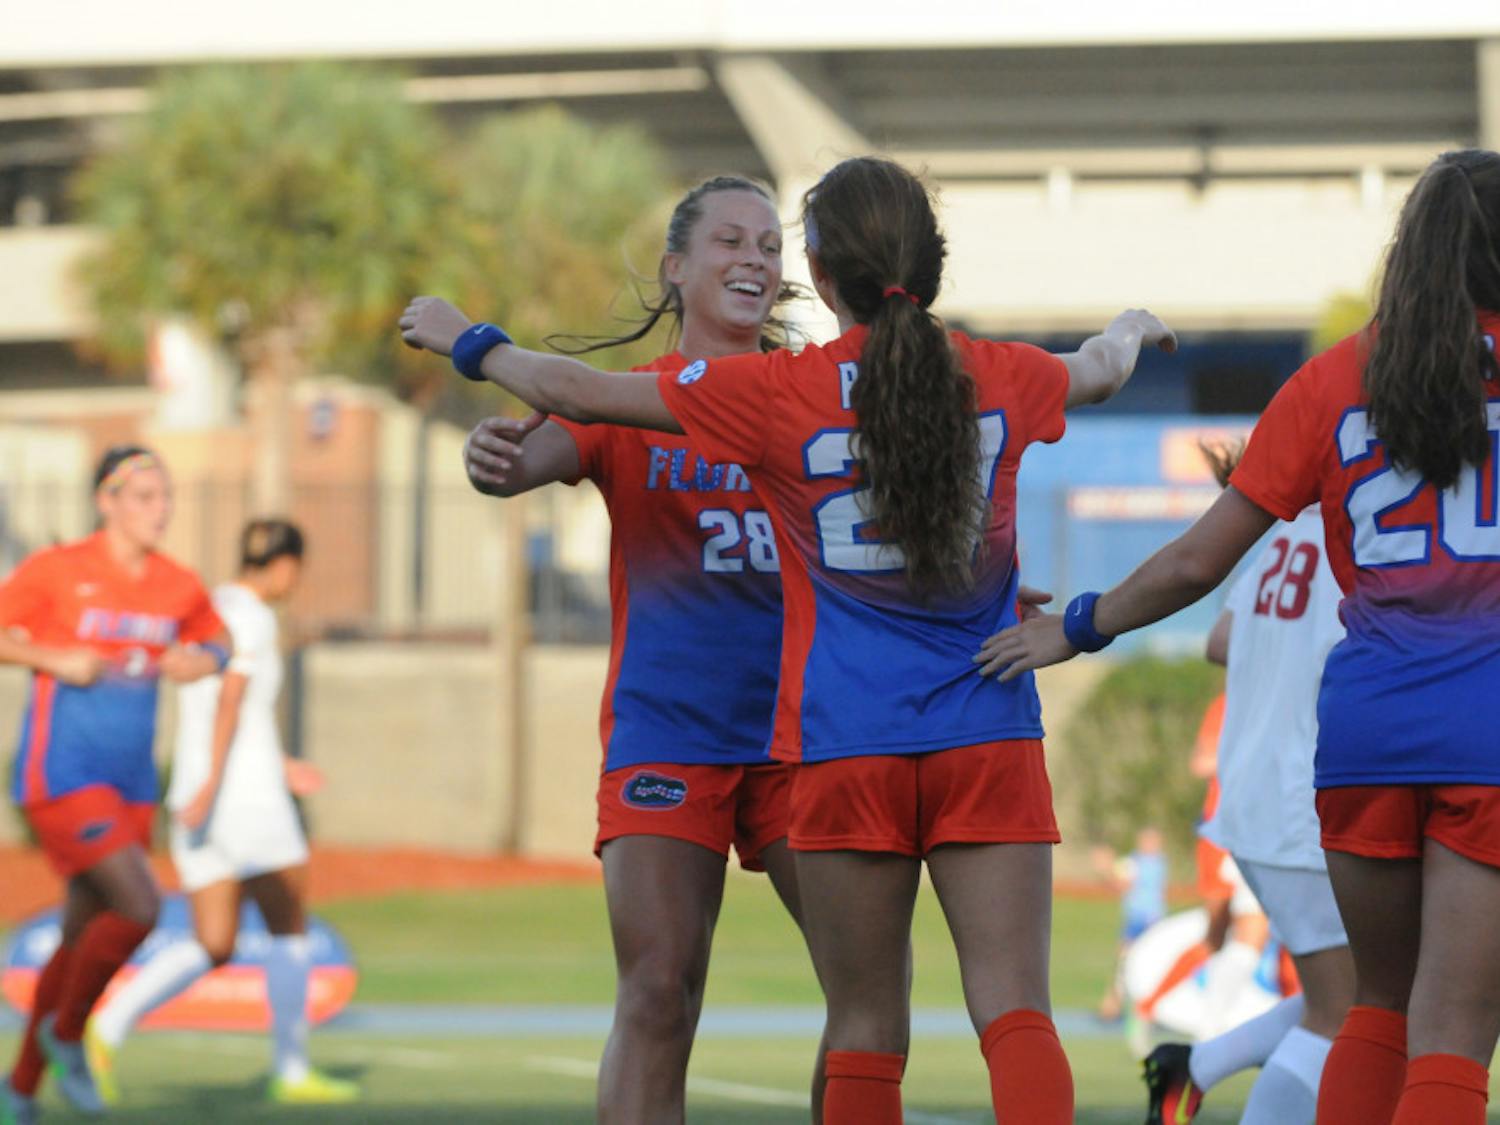 UF midfielders Meggie Dougherty Howard (28) and Mayra Pelayo celebrate after Pelayo scores the first goal in Florida's 5-2 win against Iowa State on Aug. 19, 2016, at James G. Pressly Stadium.